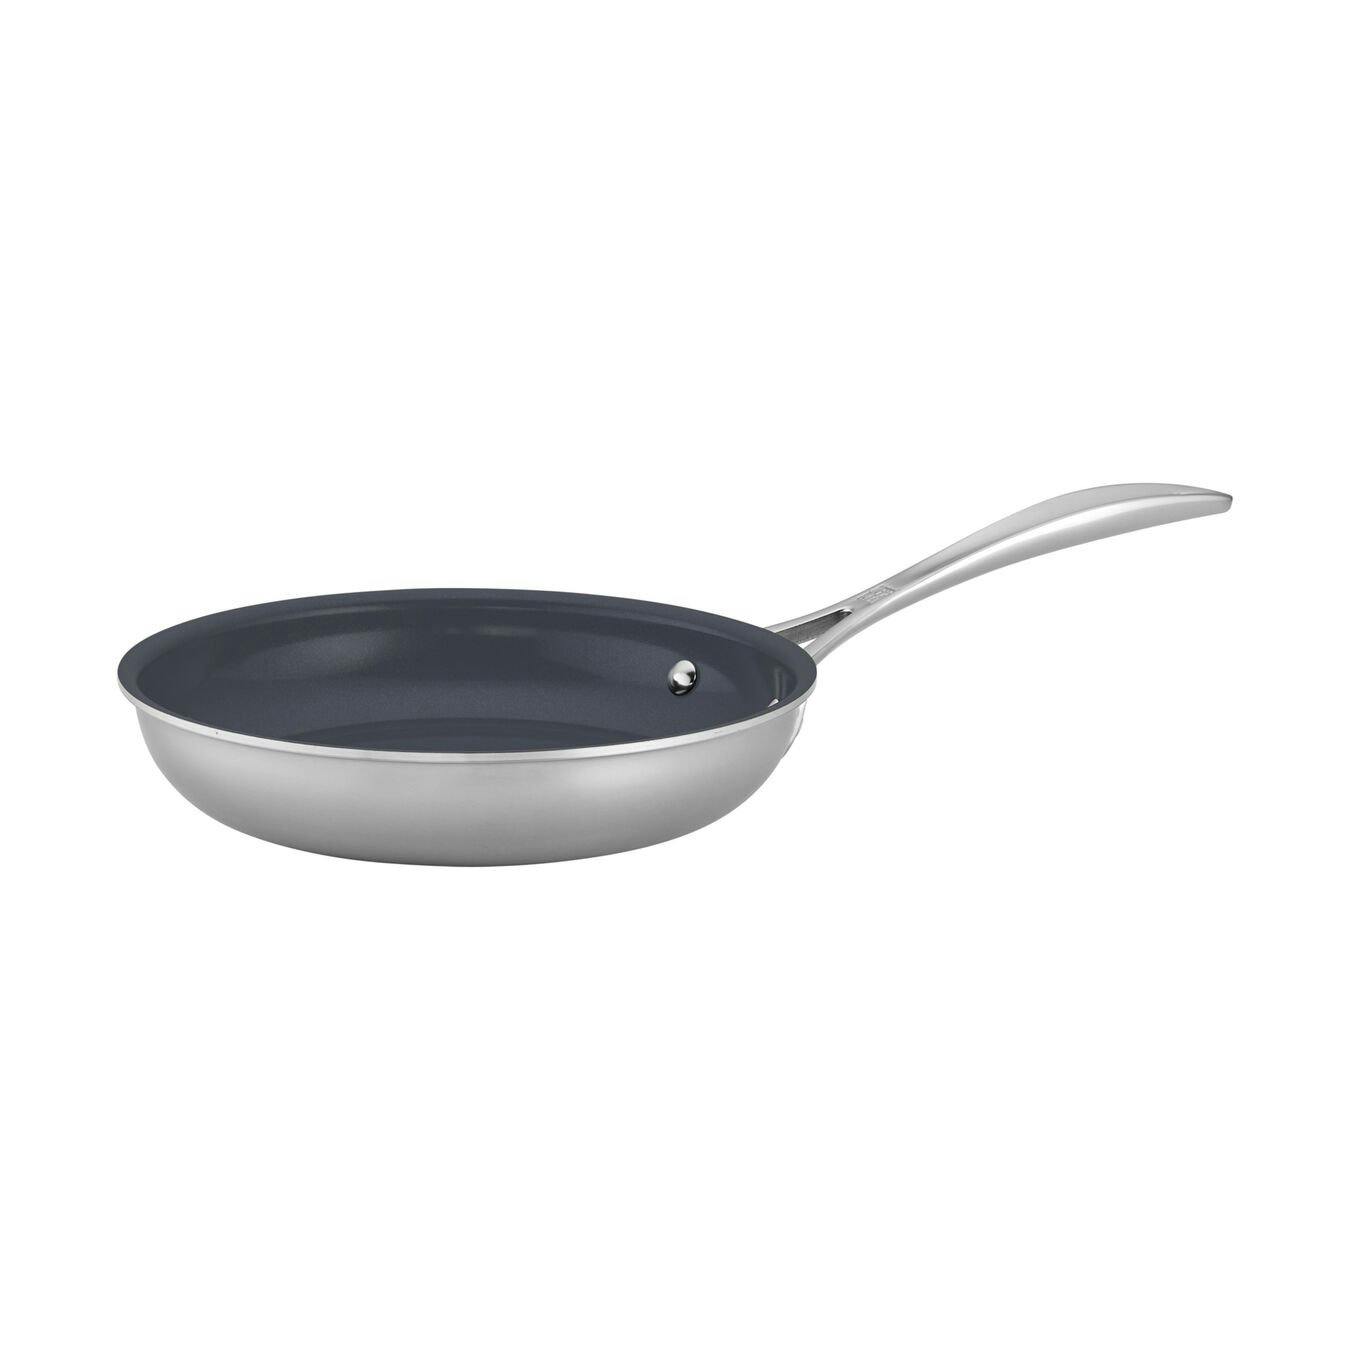 Zwilling Clad CFX 8-Inch, Stainless Steel, Ceramic, Non-Stick, Fry Pan